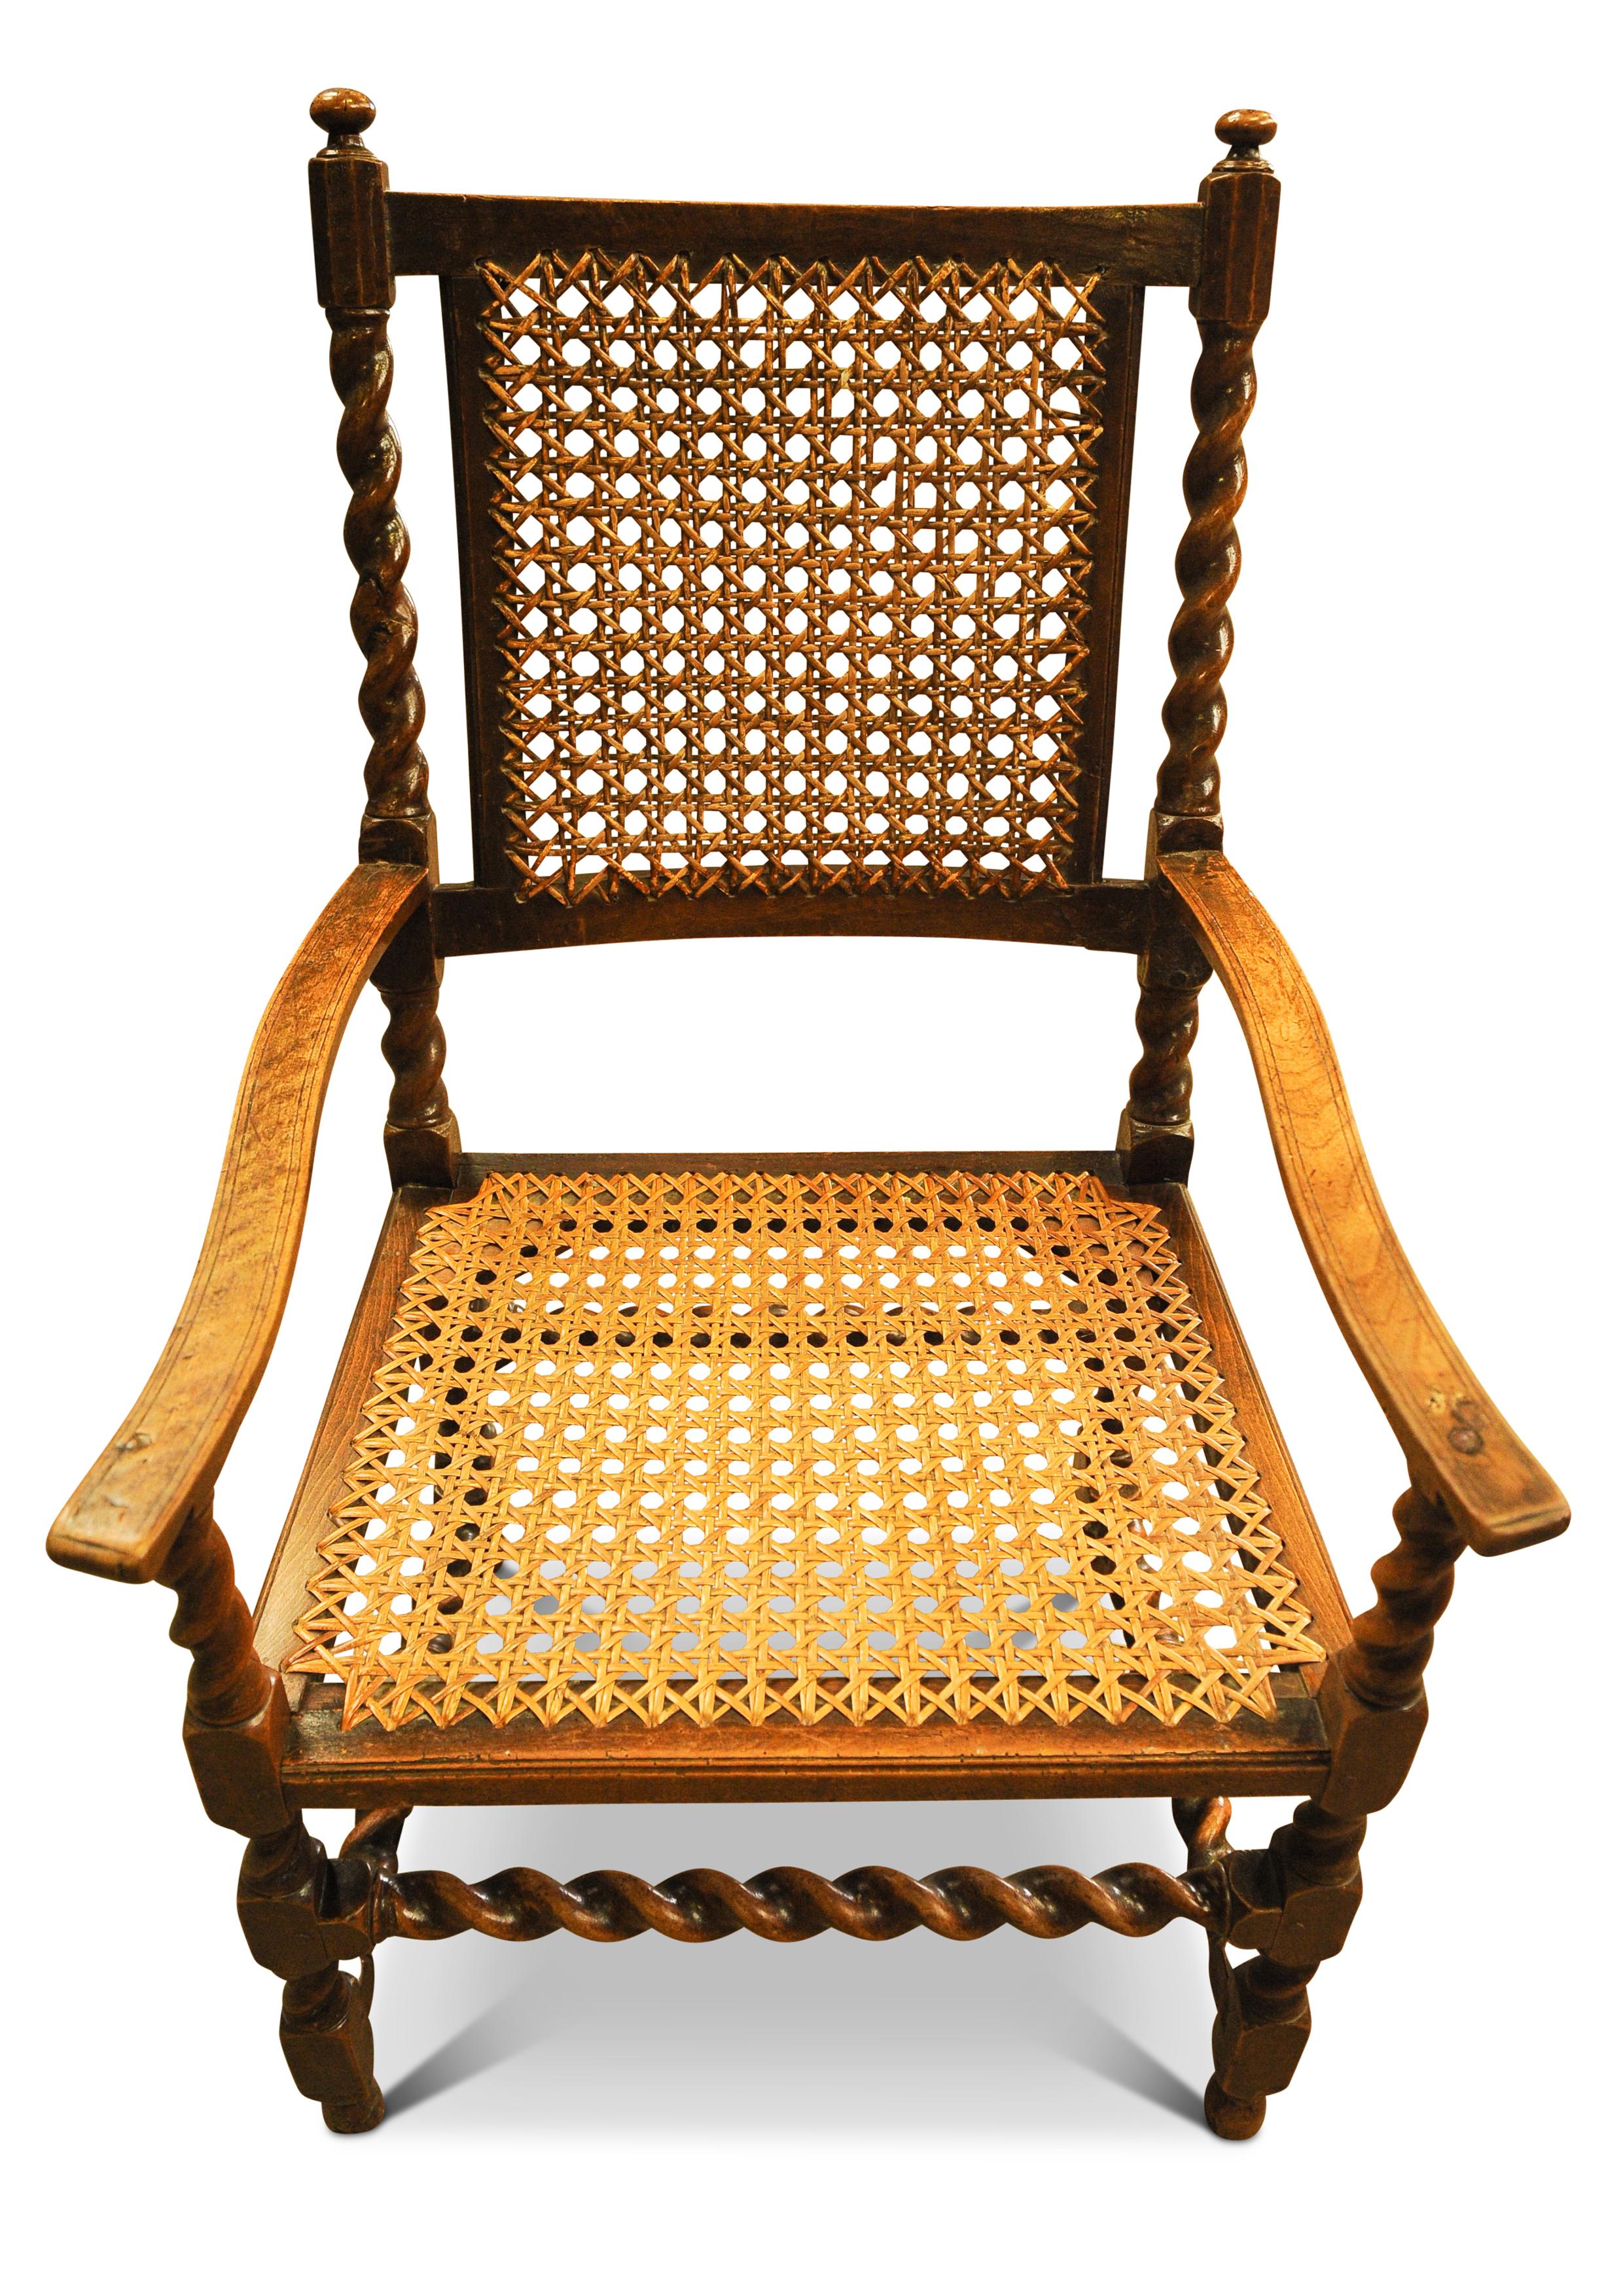 Antique Walnut Barley Twist Library Armchair with Cane Seat & Rear 1850s In Good Condition For Sale In High Wycombe, GB